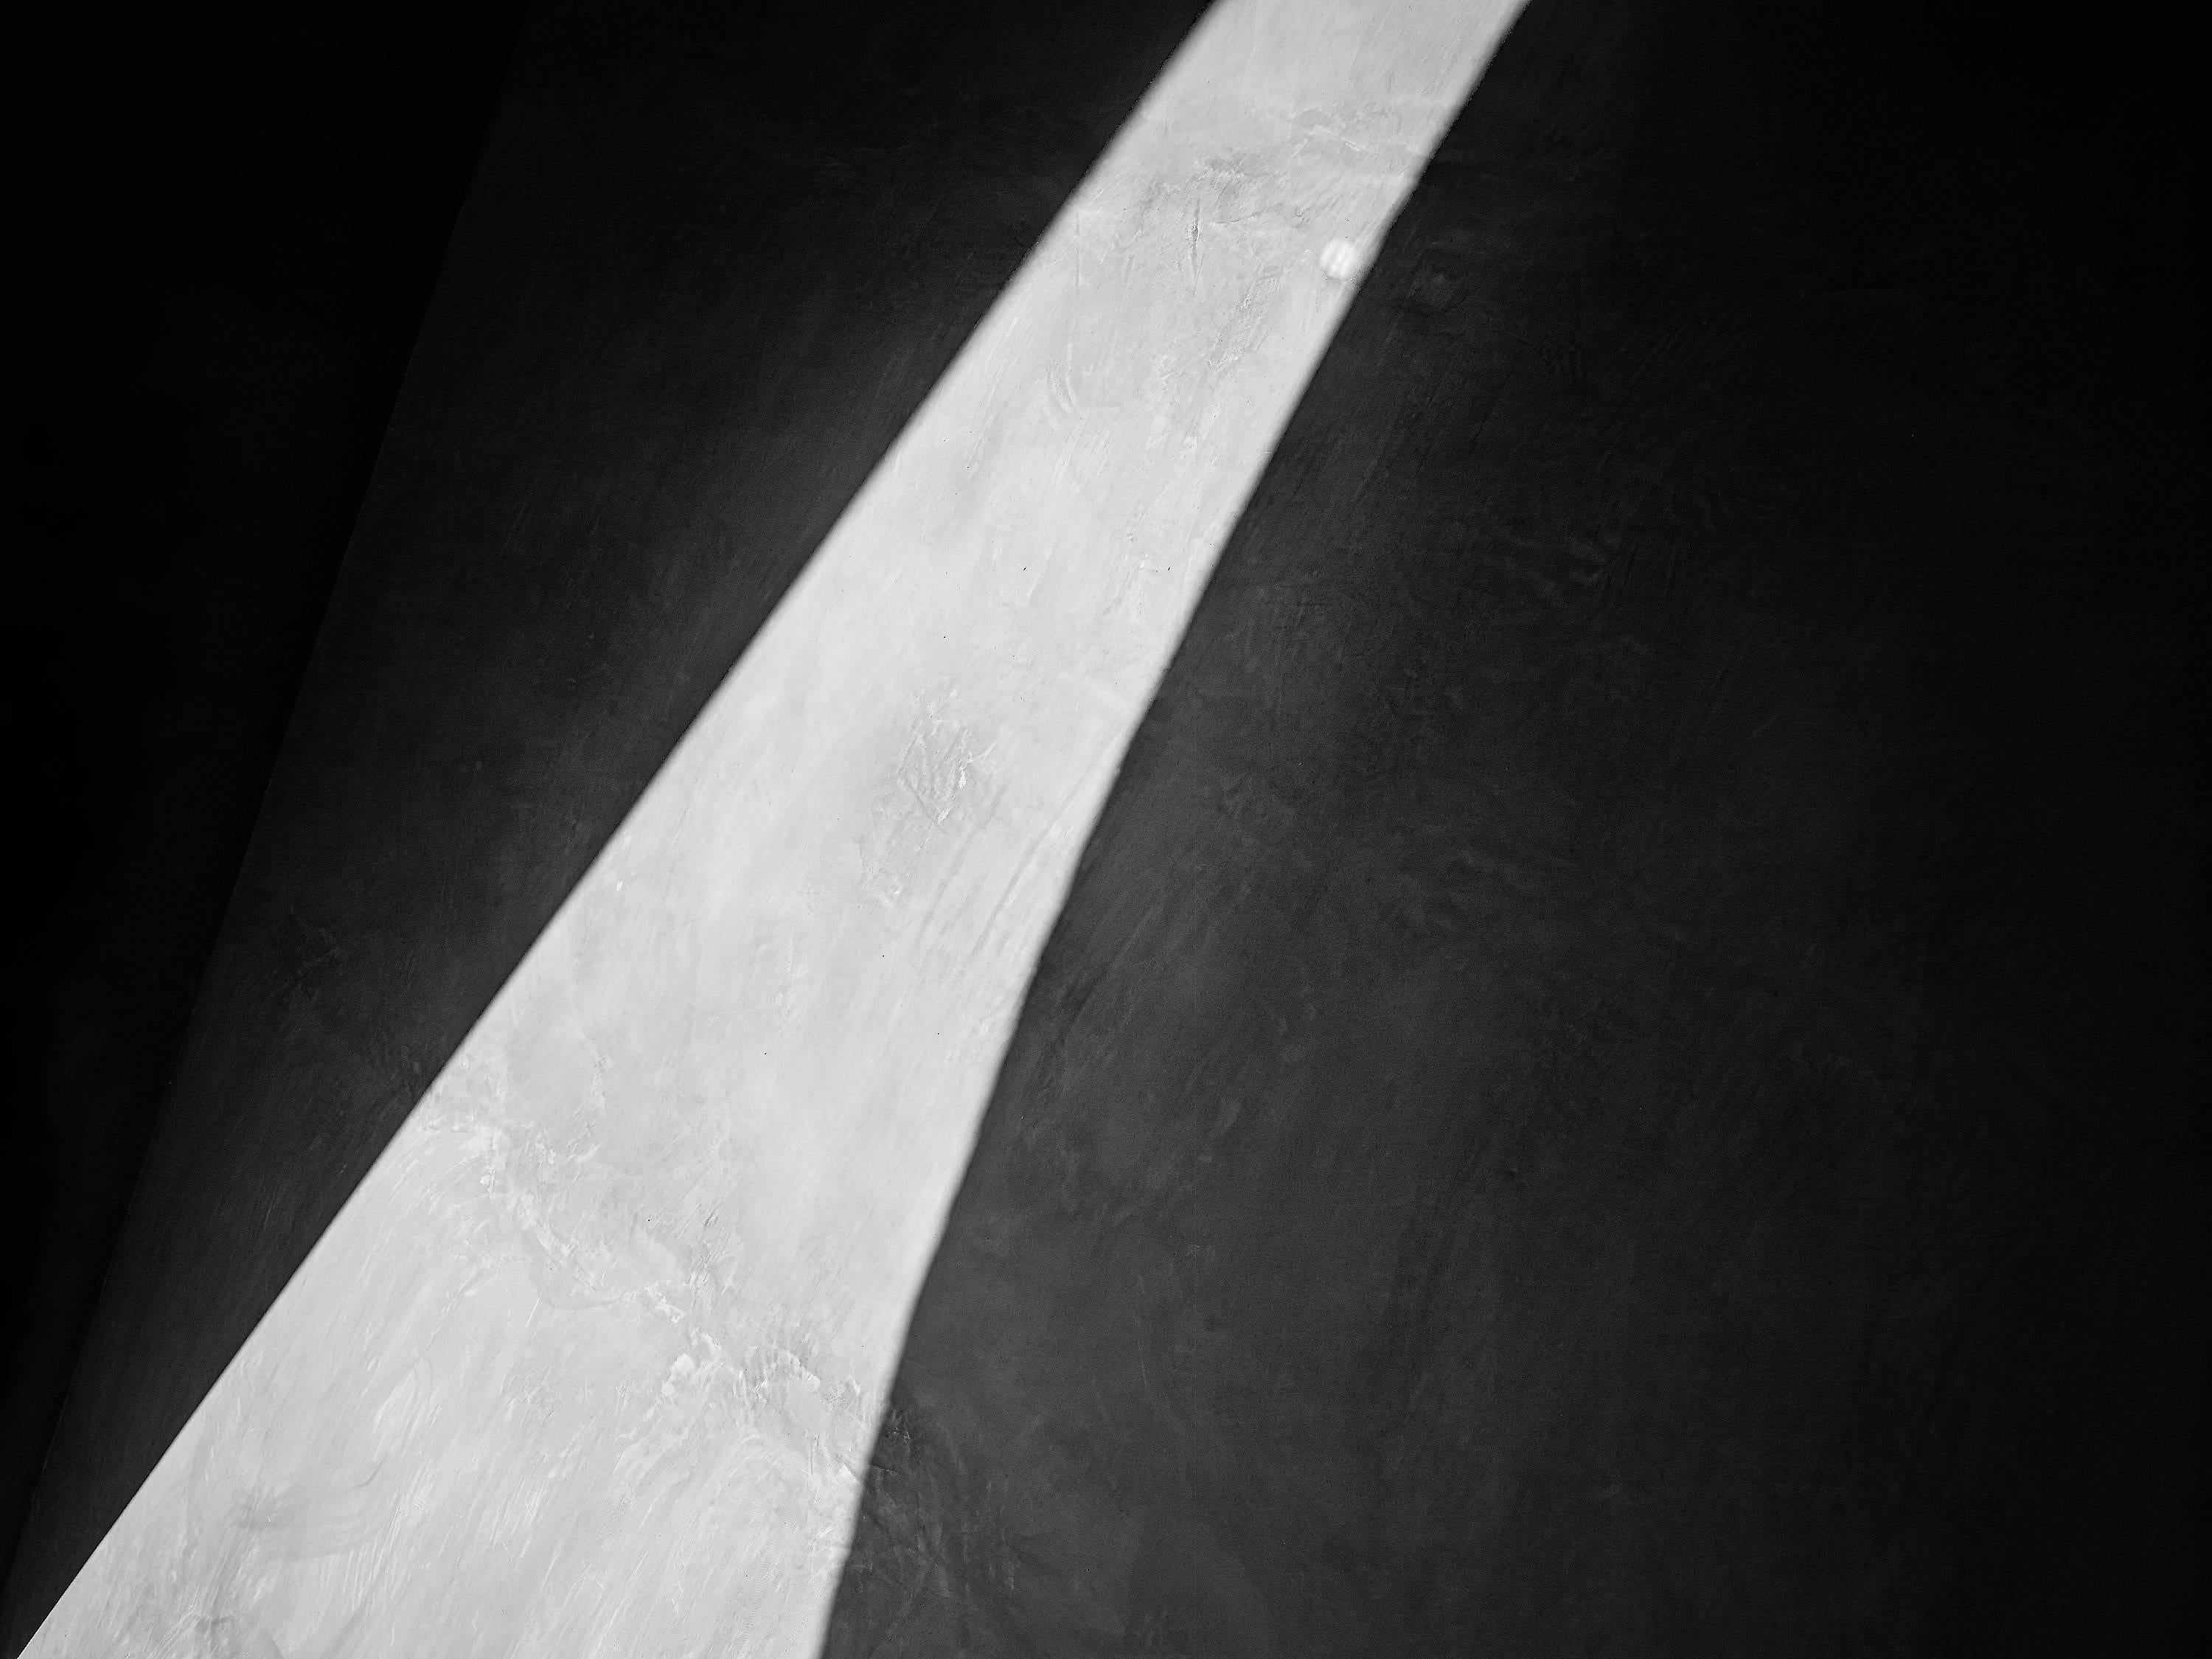 Grant Frost Abstract Photograph - "Untitled 1" -  Abstract Black and White Photography